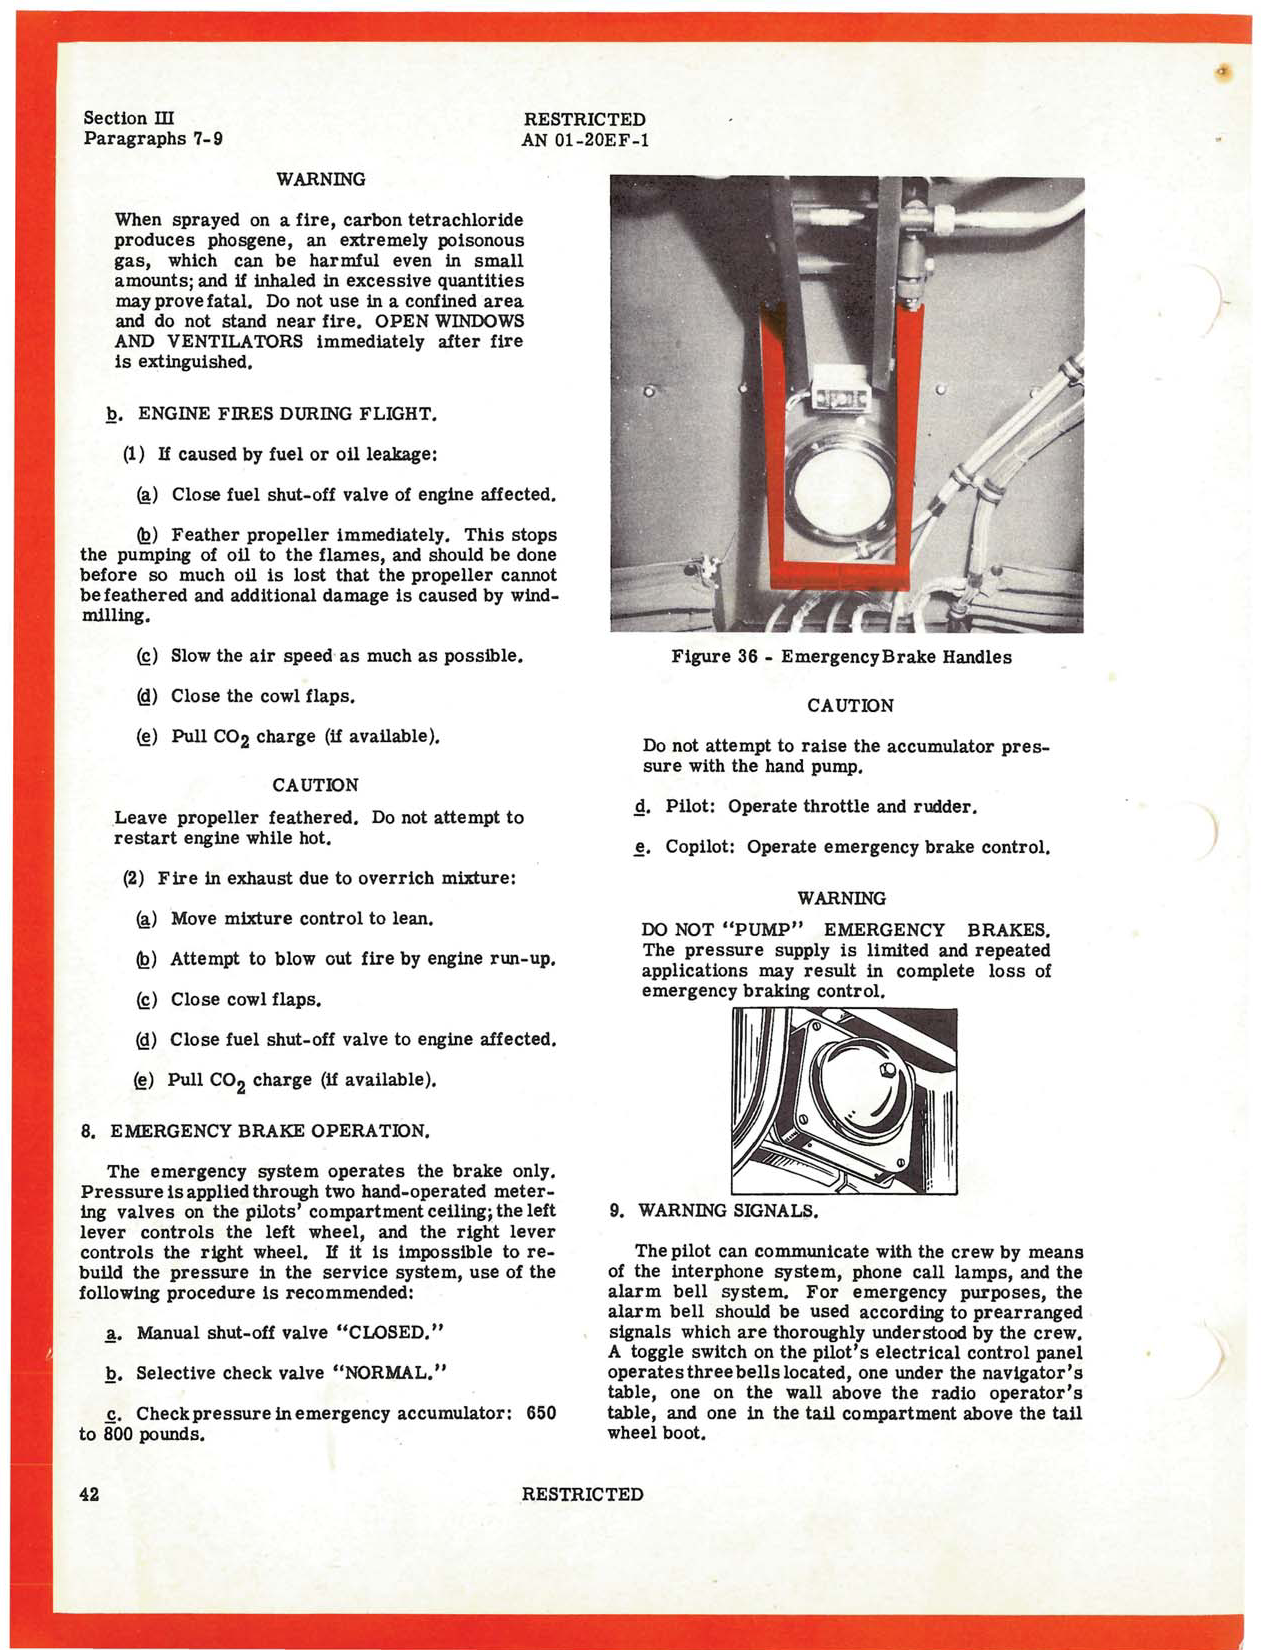 Sample page 46 from AirCorps Library document: Pilot Flight Operating Instructions - B-17F, B-17G